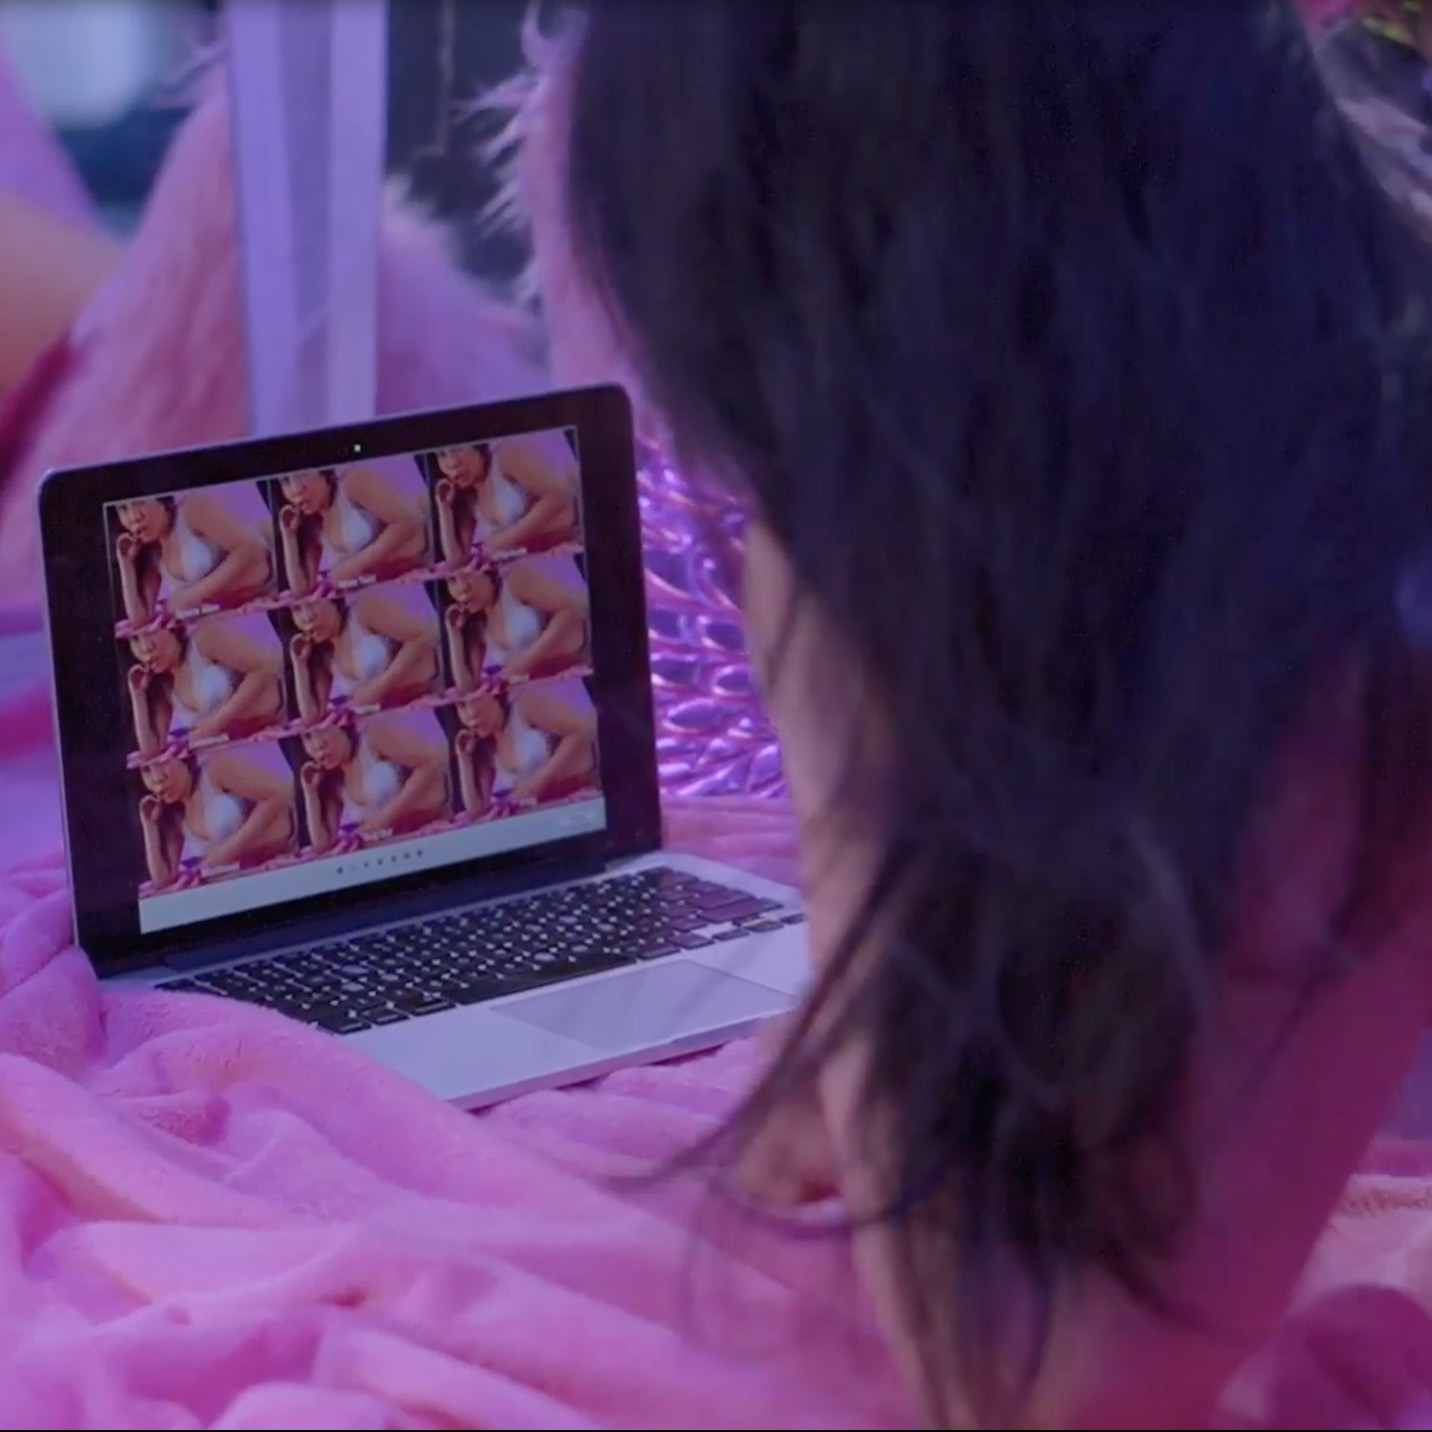 A femme person reclines on pink fabric facing an open laptop, their pose reflected multiple times on its screen.